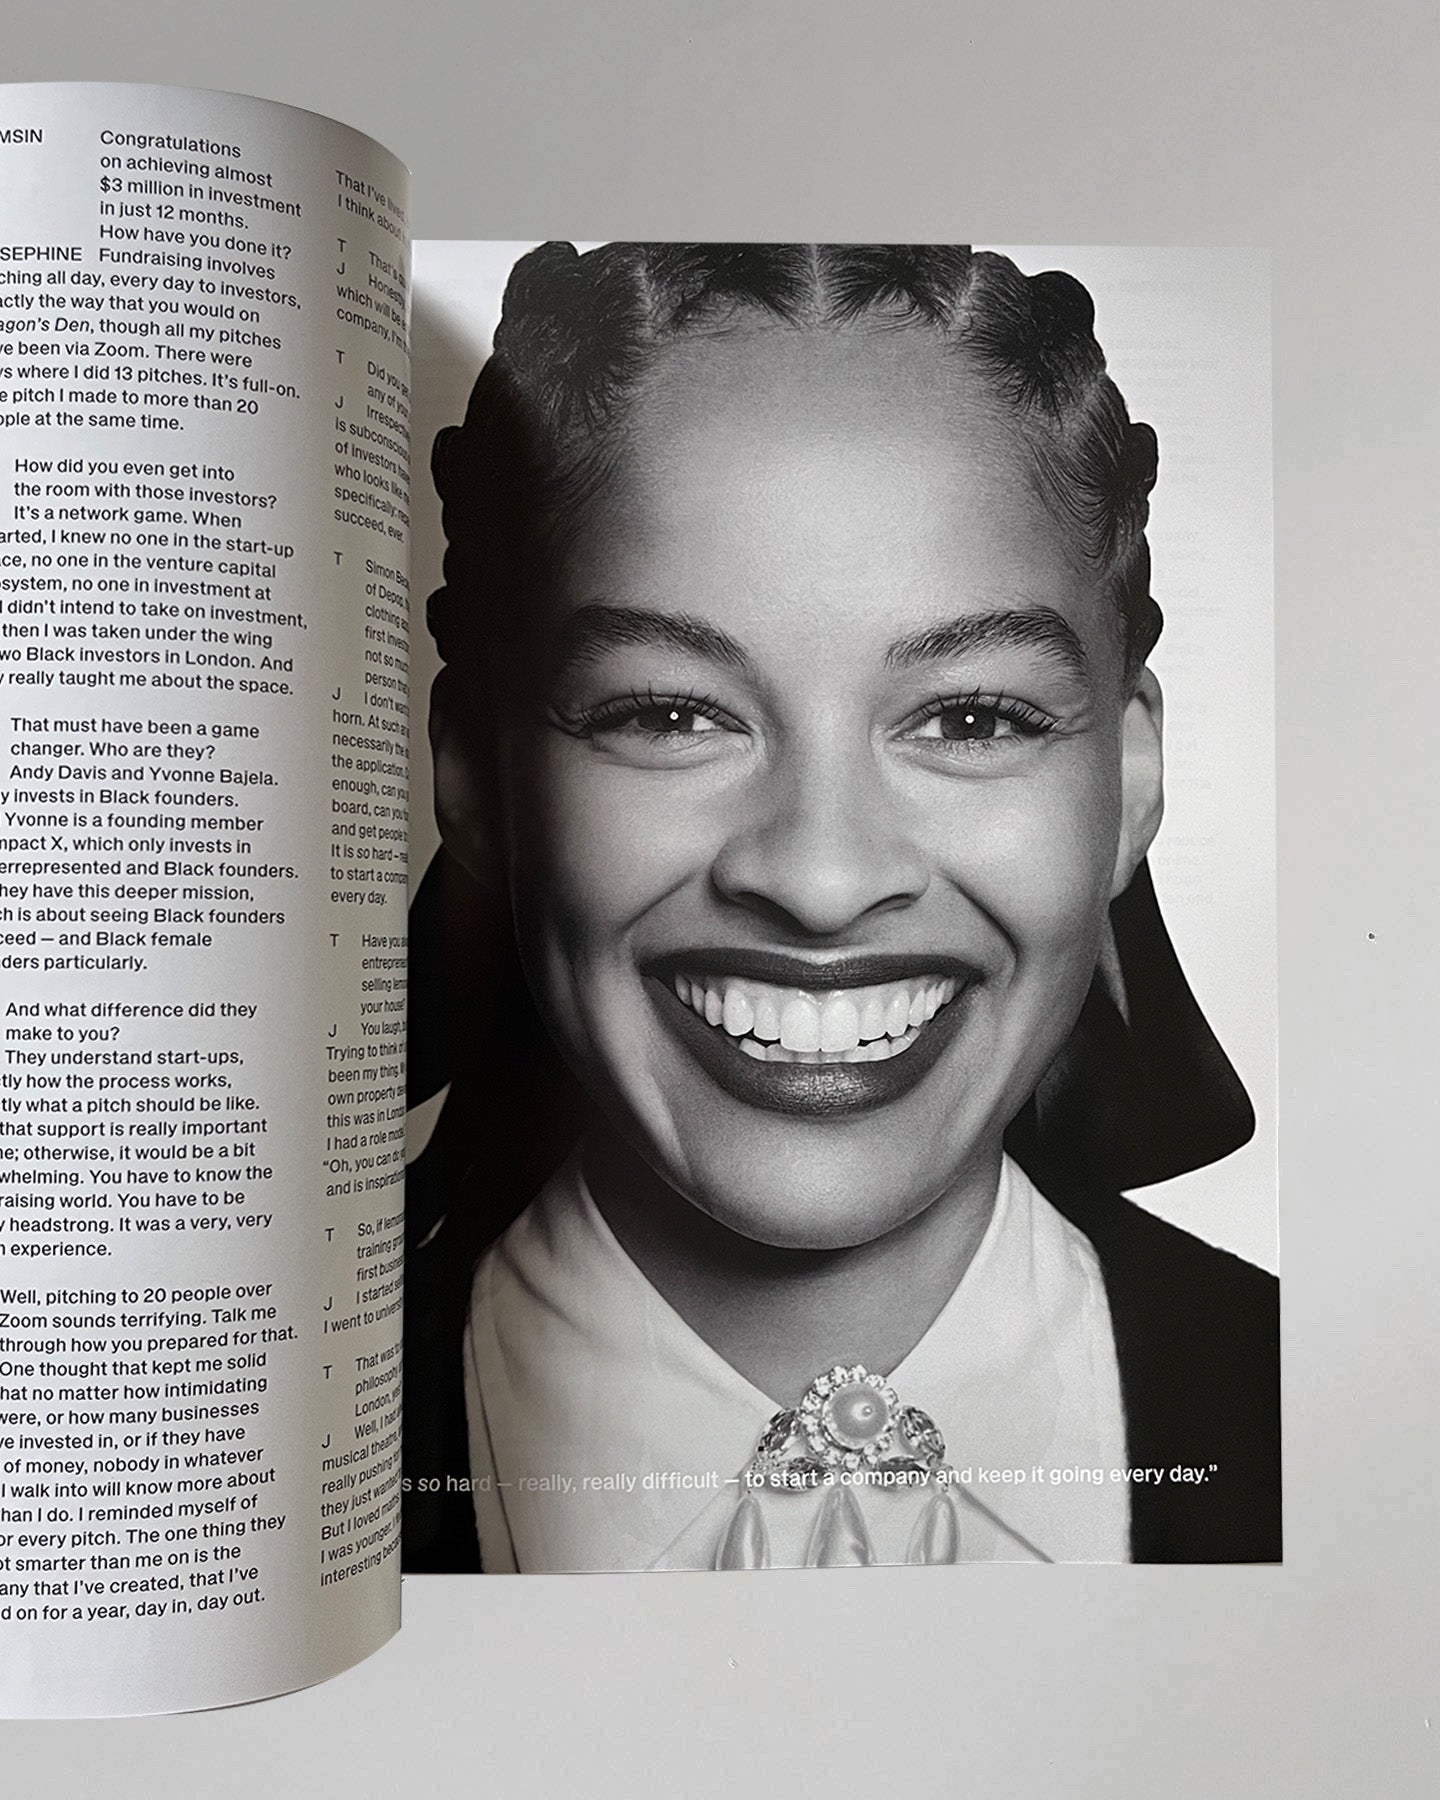    The Gentlewoman Issue 26 Inside